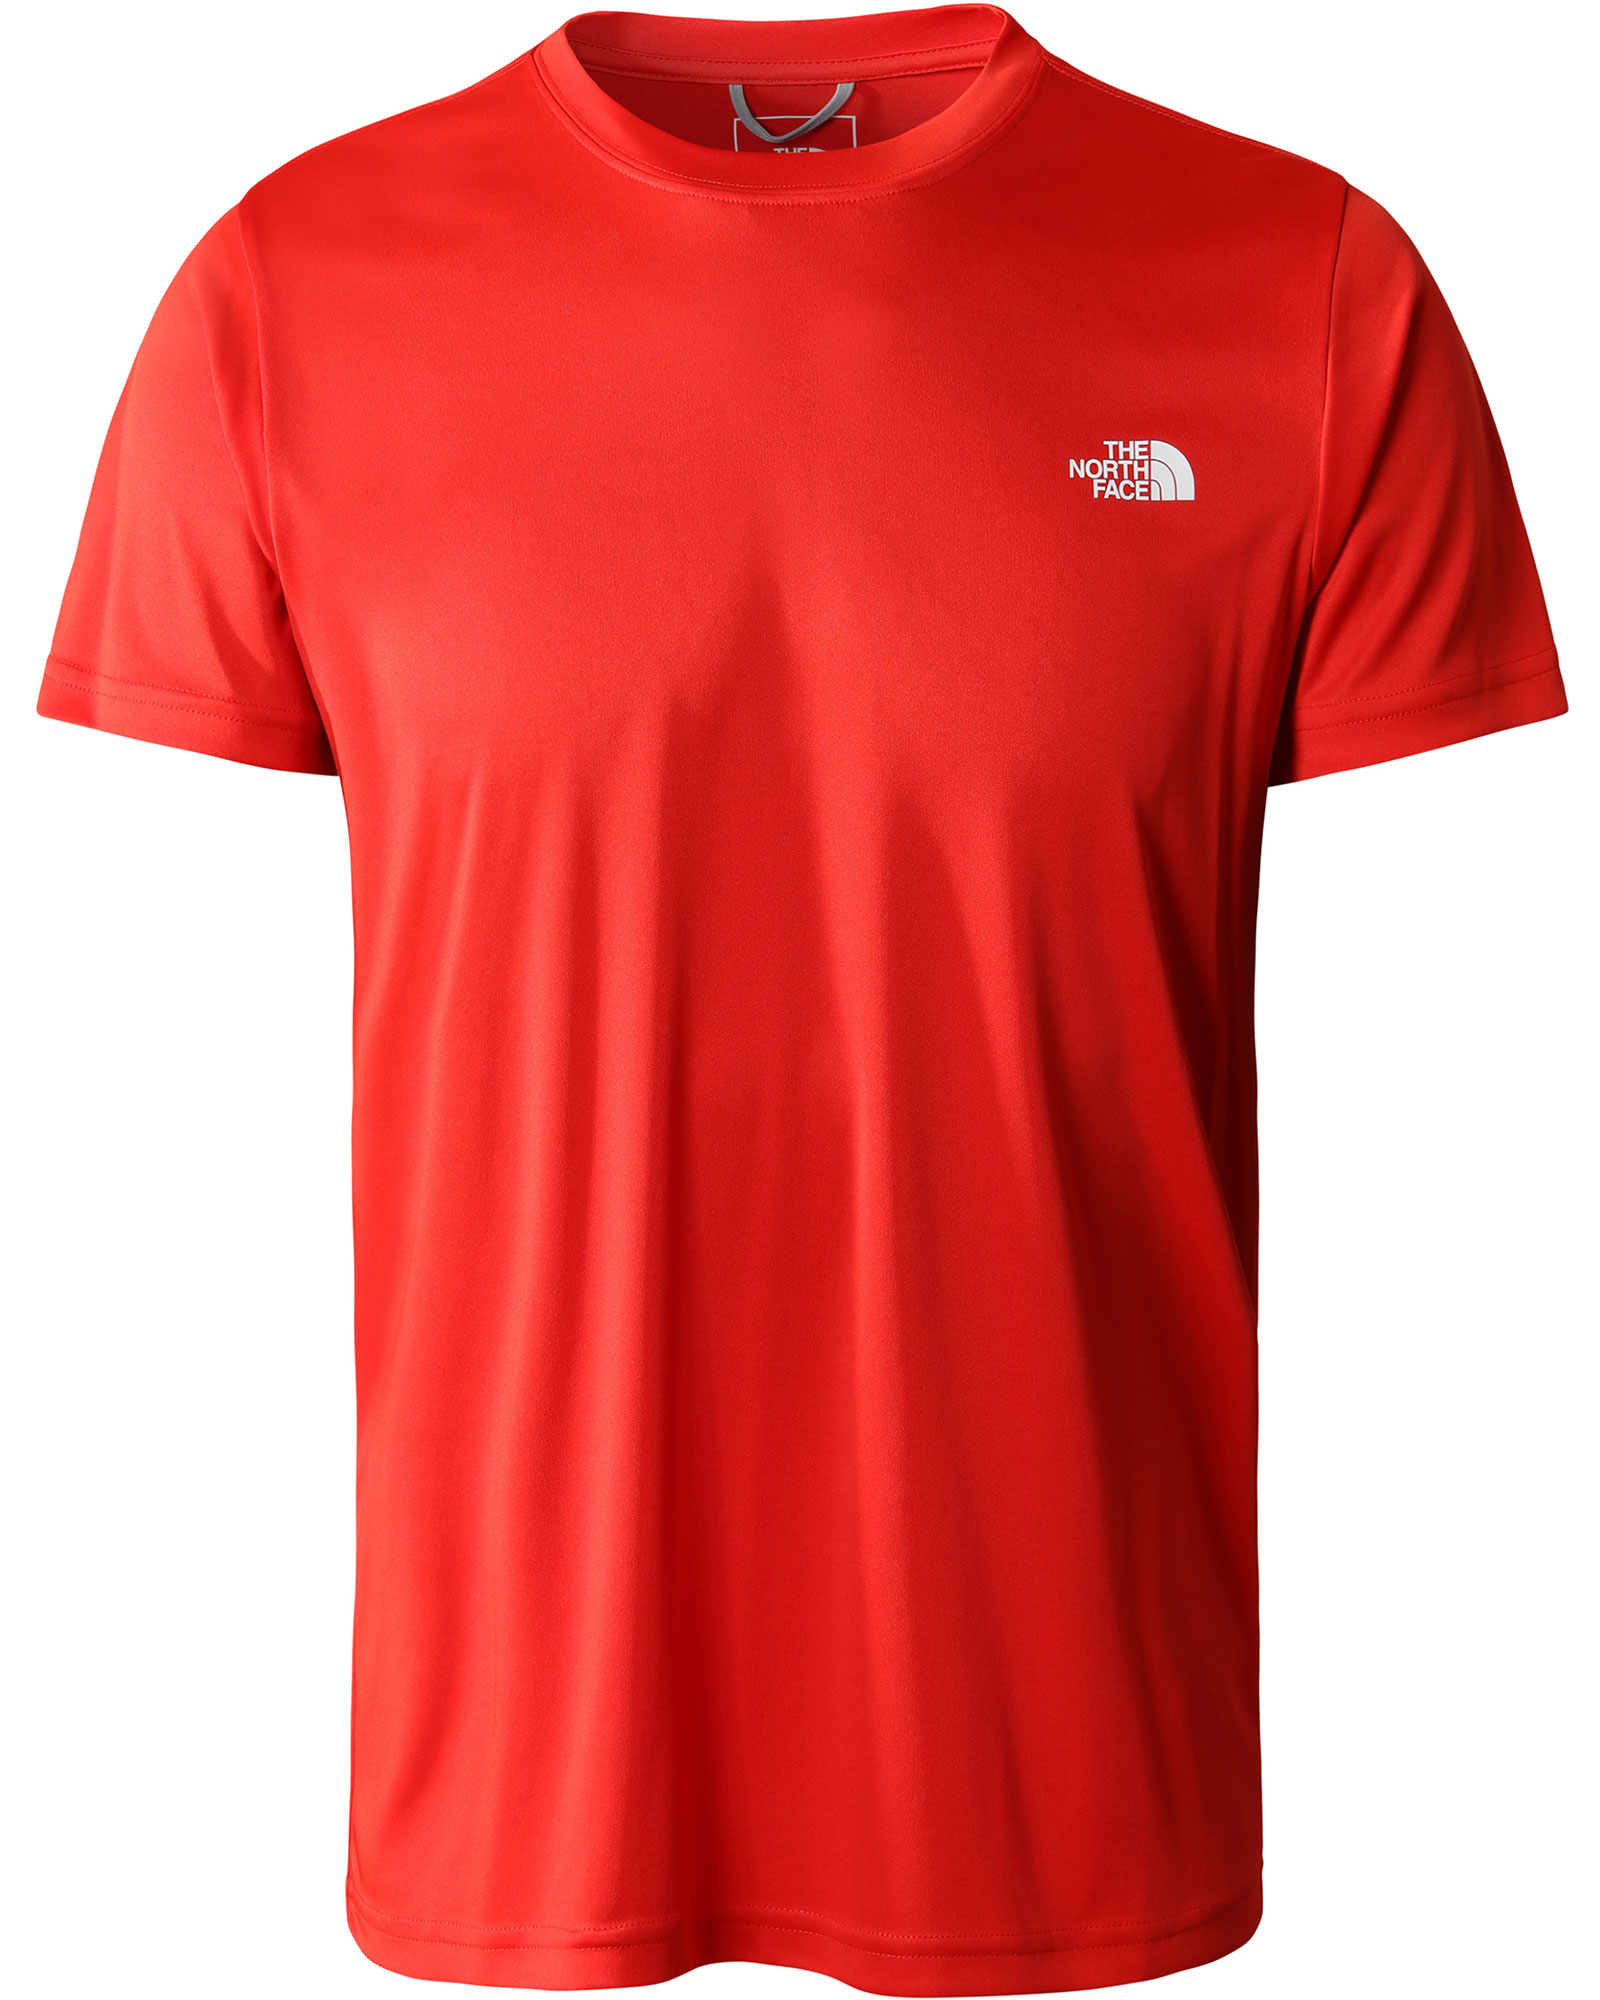 The North Face Reaxion Amp Mens Crew T-shirt